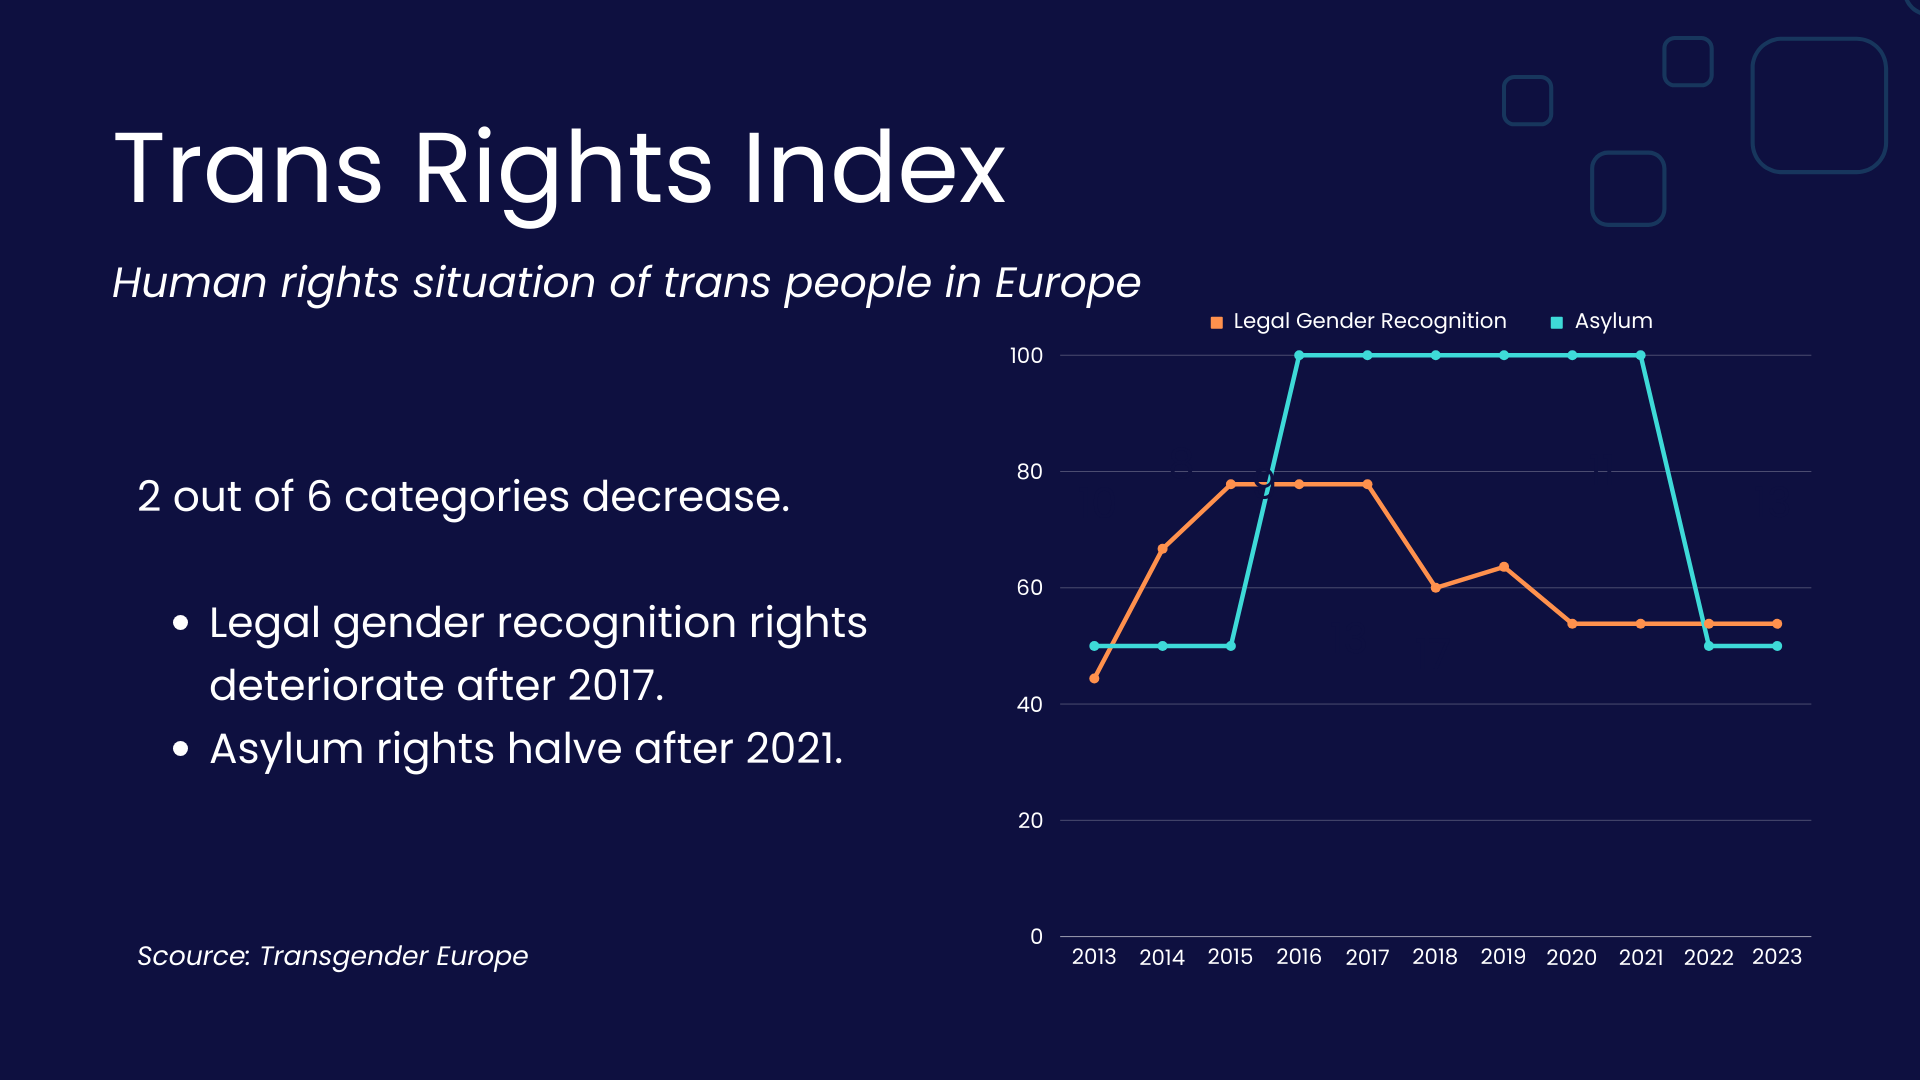 Trans rights index: Human rights situation of trans people in Europe. 2 out of 6 categories decrease: Legal gender recognition rights deteriorate after 2017. Asylum rights halve after 2012. (Source: Transgender Europe)